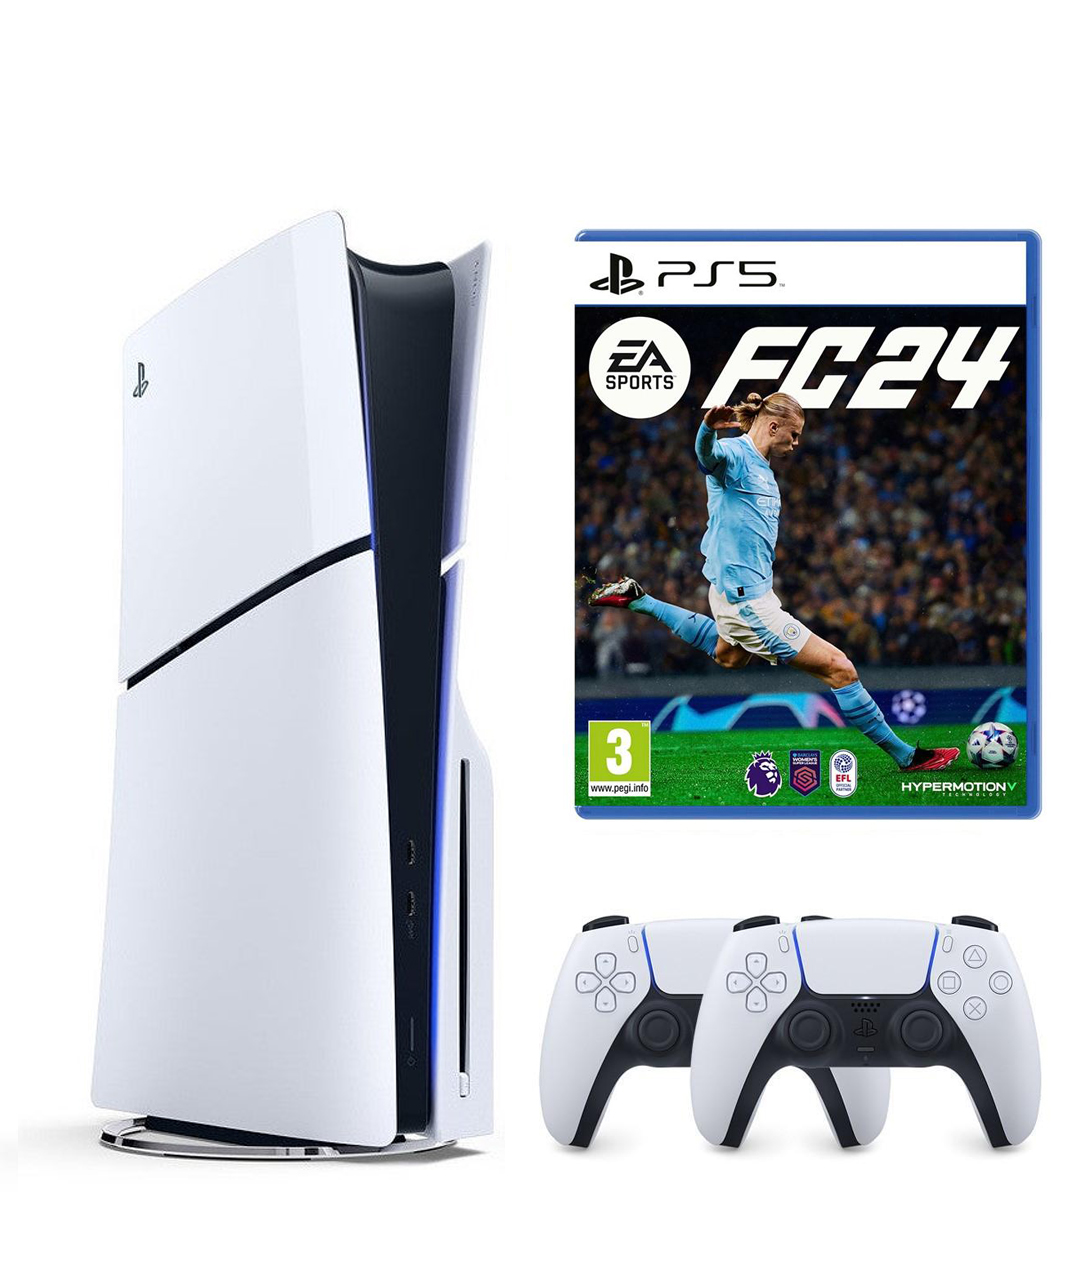 /images/thumbs/0029786_sony-playstation-5-ps5-slim-cd-l-resim-30.sony-playstation-5-slim-cd-li-2-kollu-fc.jpeg